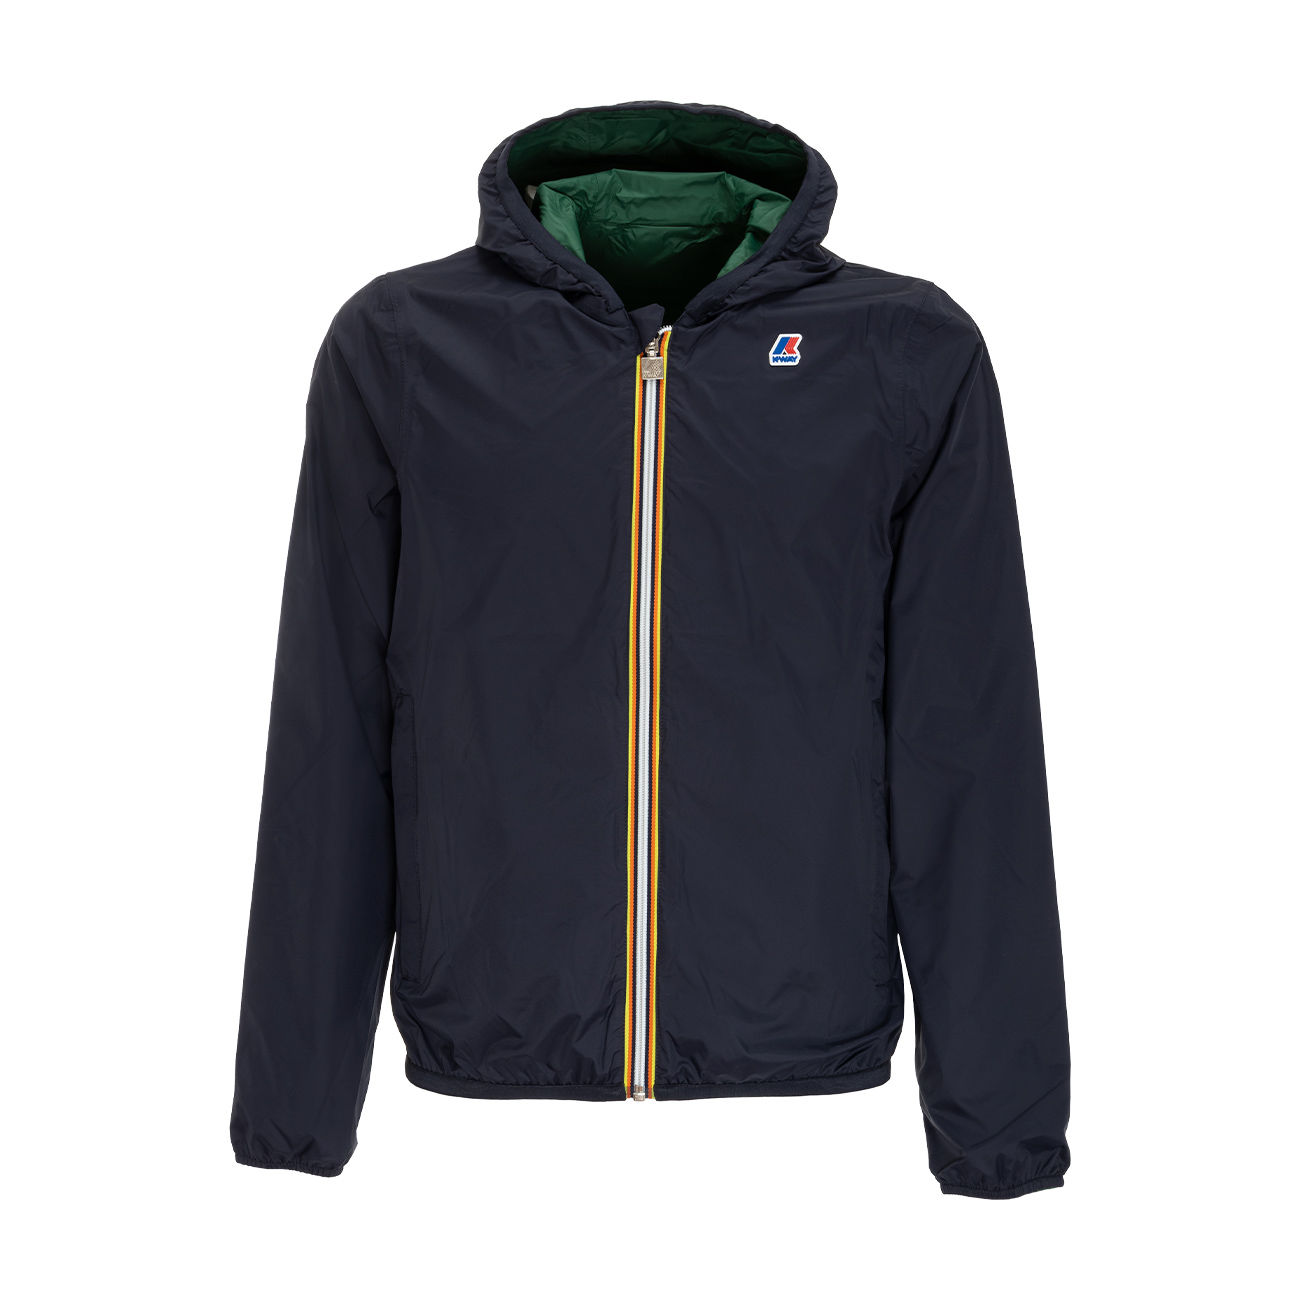 Kway, Kway Jackets and more Clothing